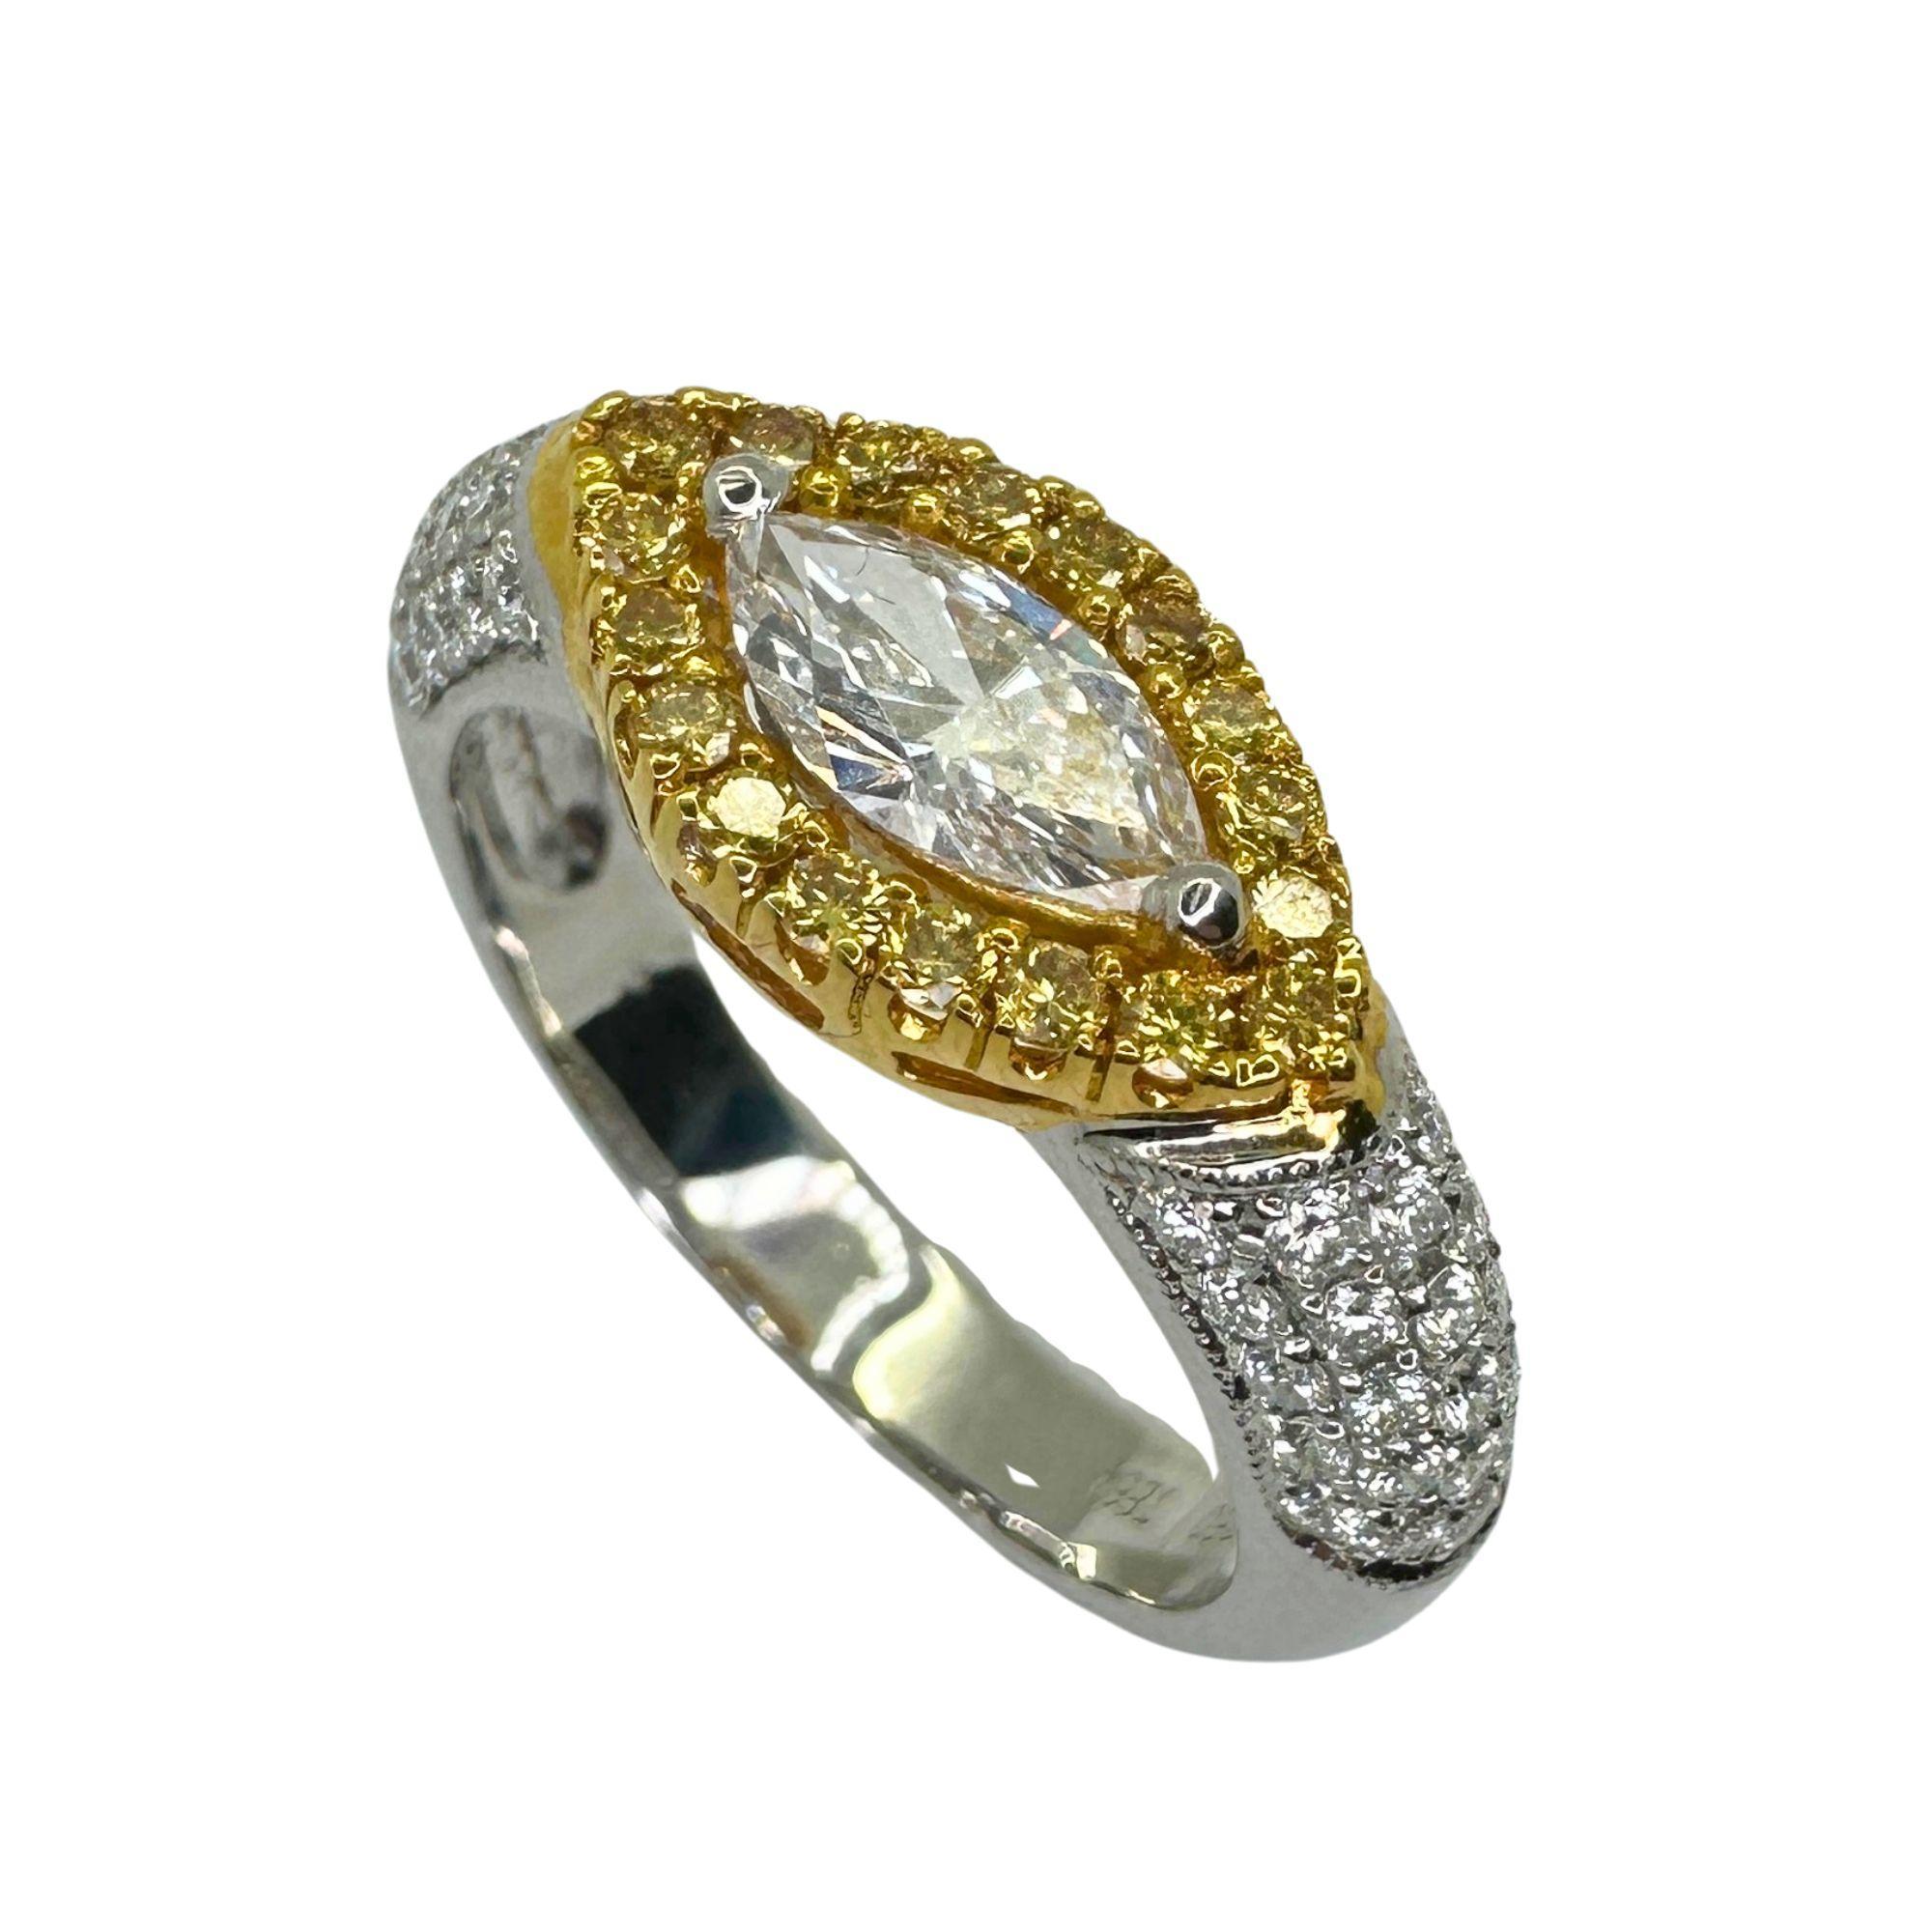 This exquisite ring features an 18k East-West marquise shaped diamond center, complemented by a stunning yellow diamond halo. Crafted in 18k white gold, this 5.2 gram ring boasts a total diamond weight of 1.05 carats, making it a luxurious and